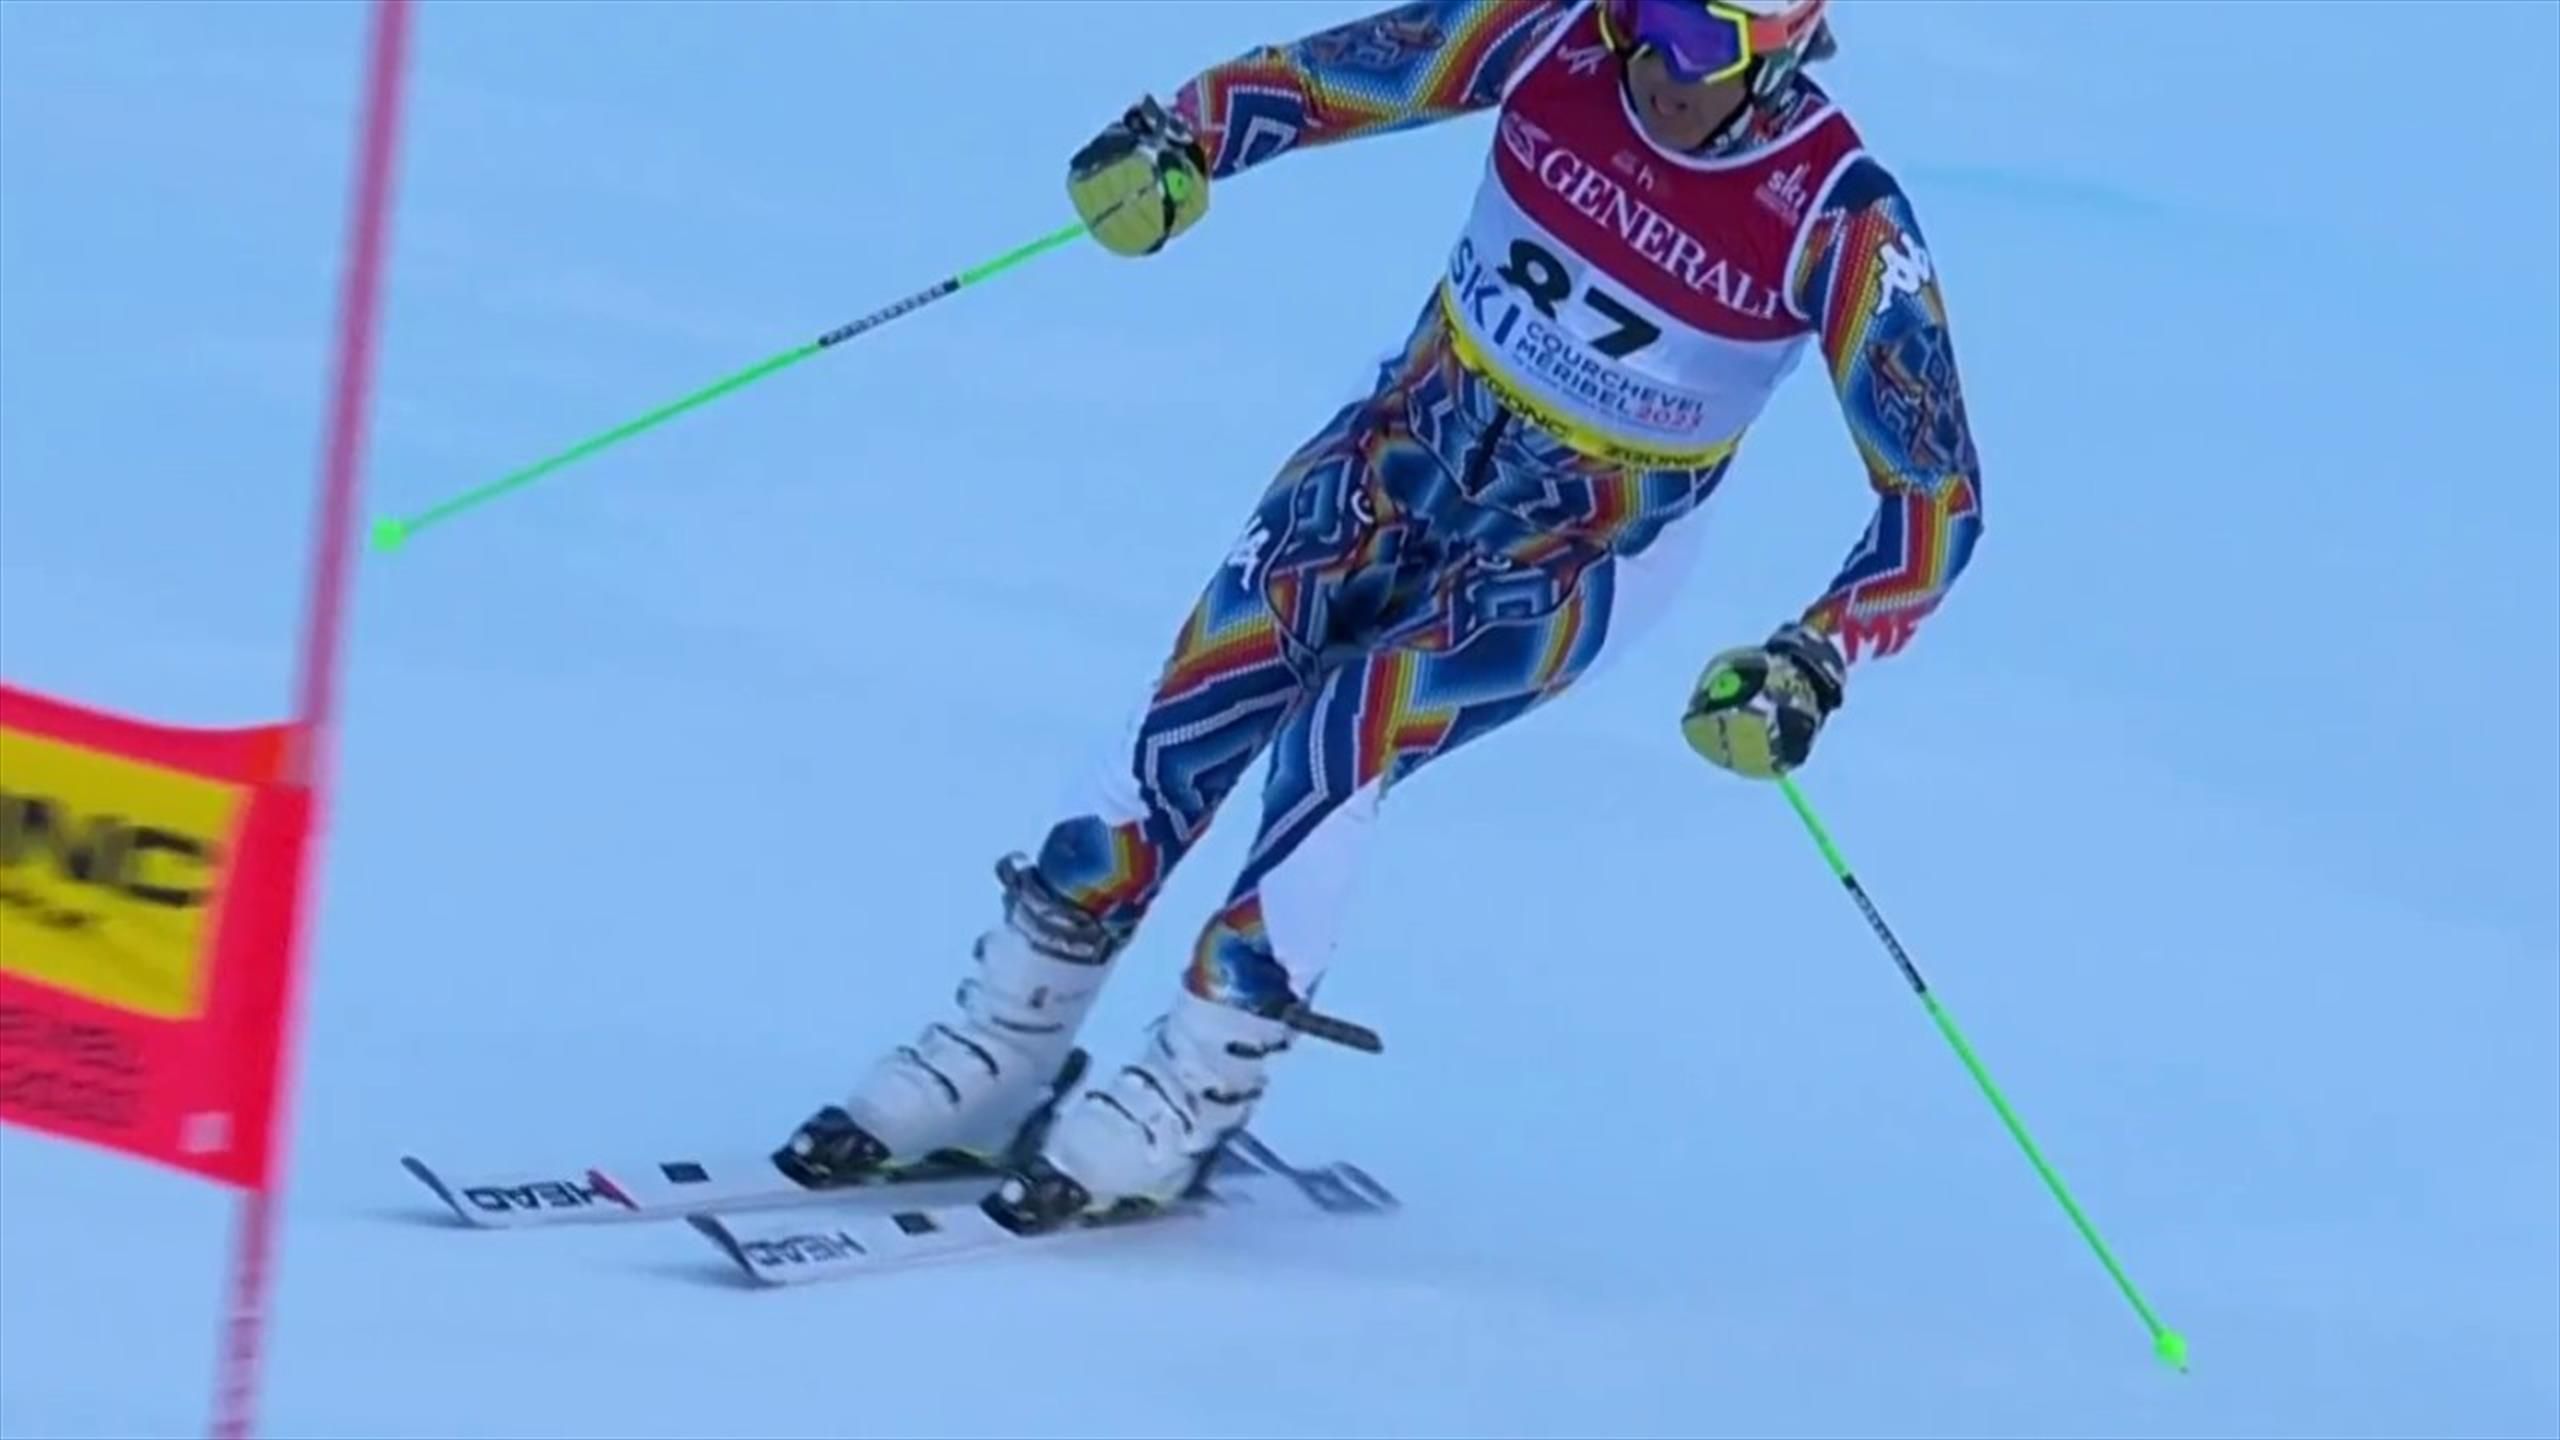 Hubertus von Hohenlohe competes in giant slalom at 64-years-old - Alpine Skiing video